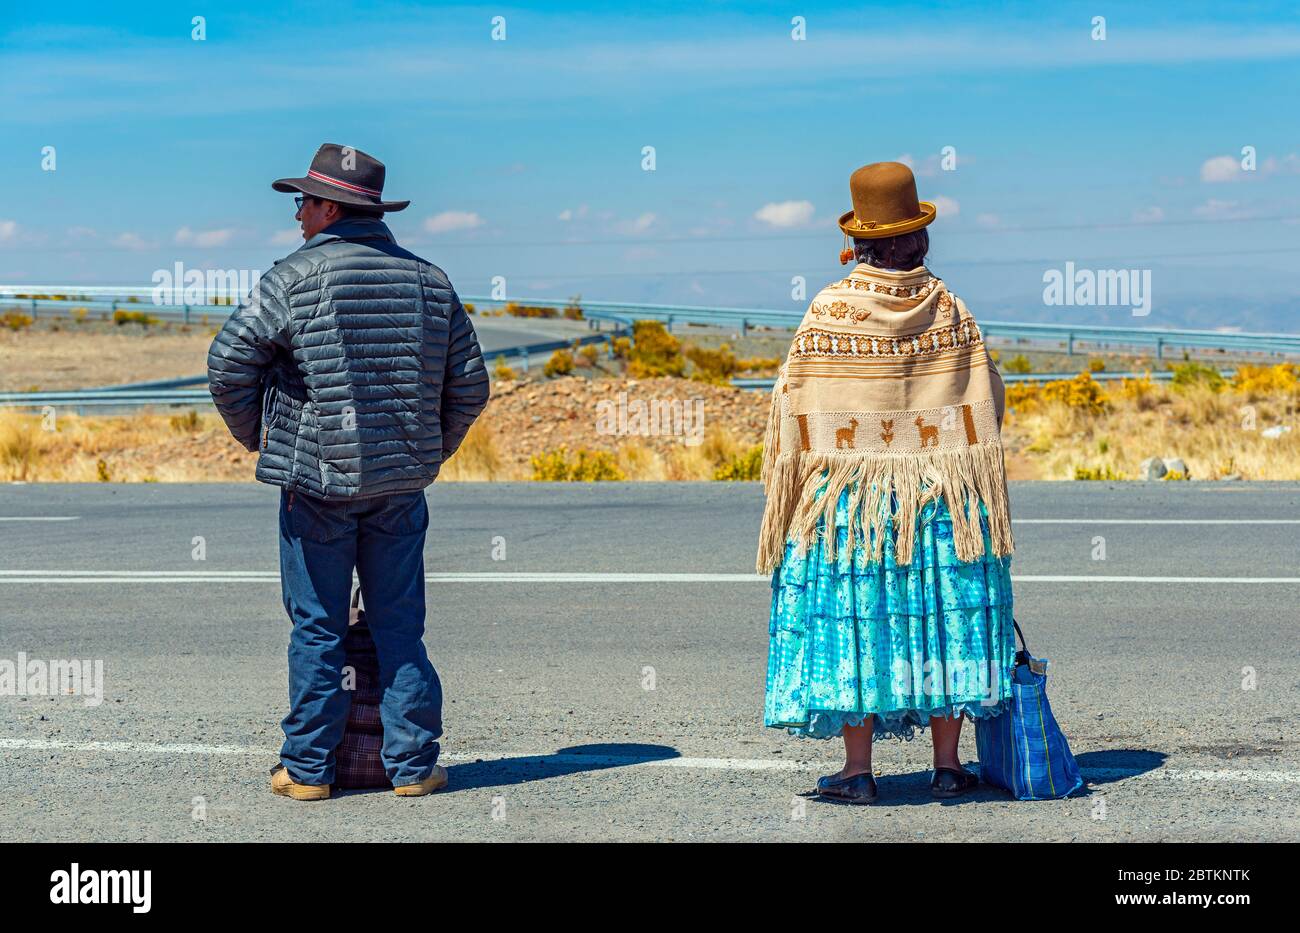 A couple of Bolivian Aymara Indigenous, with the woman in traditional clothing, waiting for transport along a highway, La Paz, Bolivia. Stock Photo